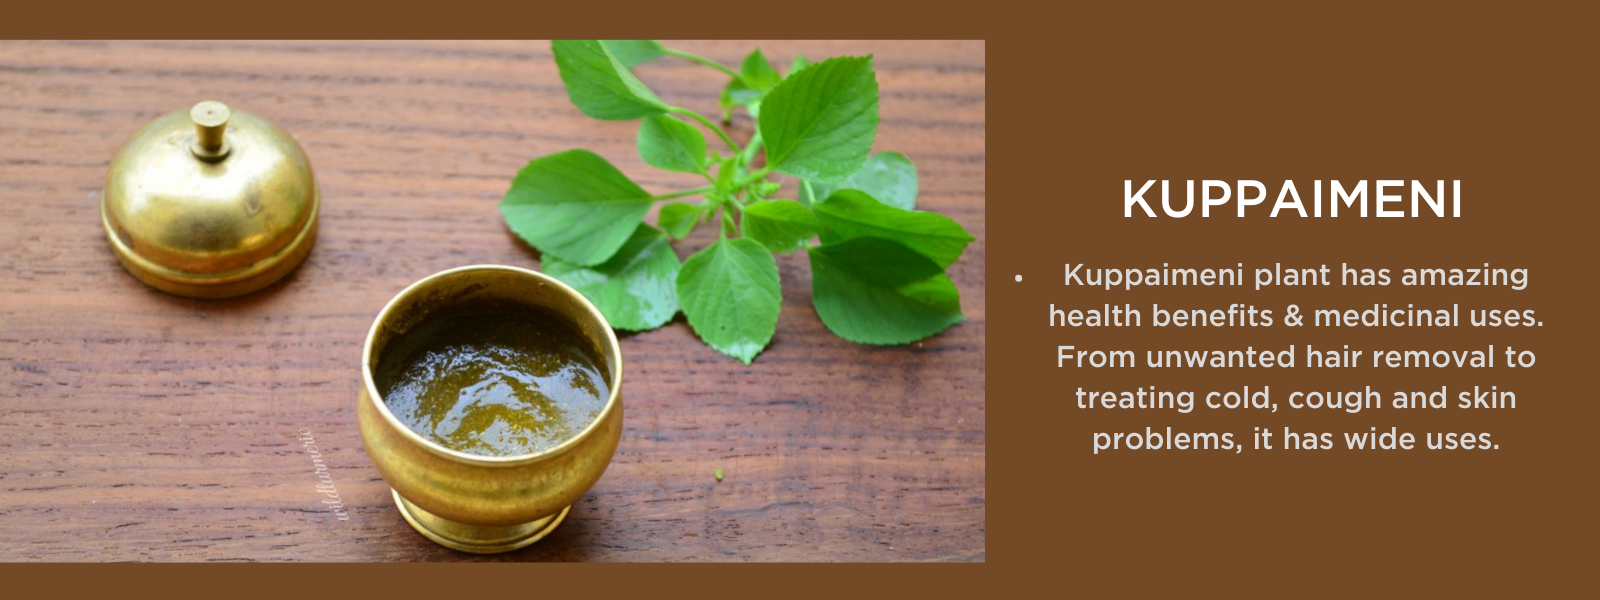 Kuppaimeni - Health Benefits, Uses and Important Facts